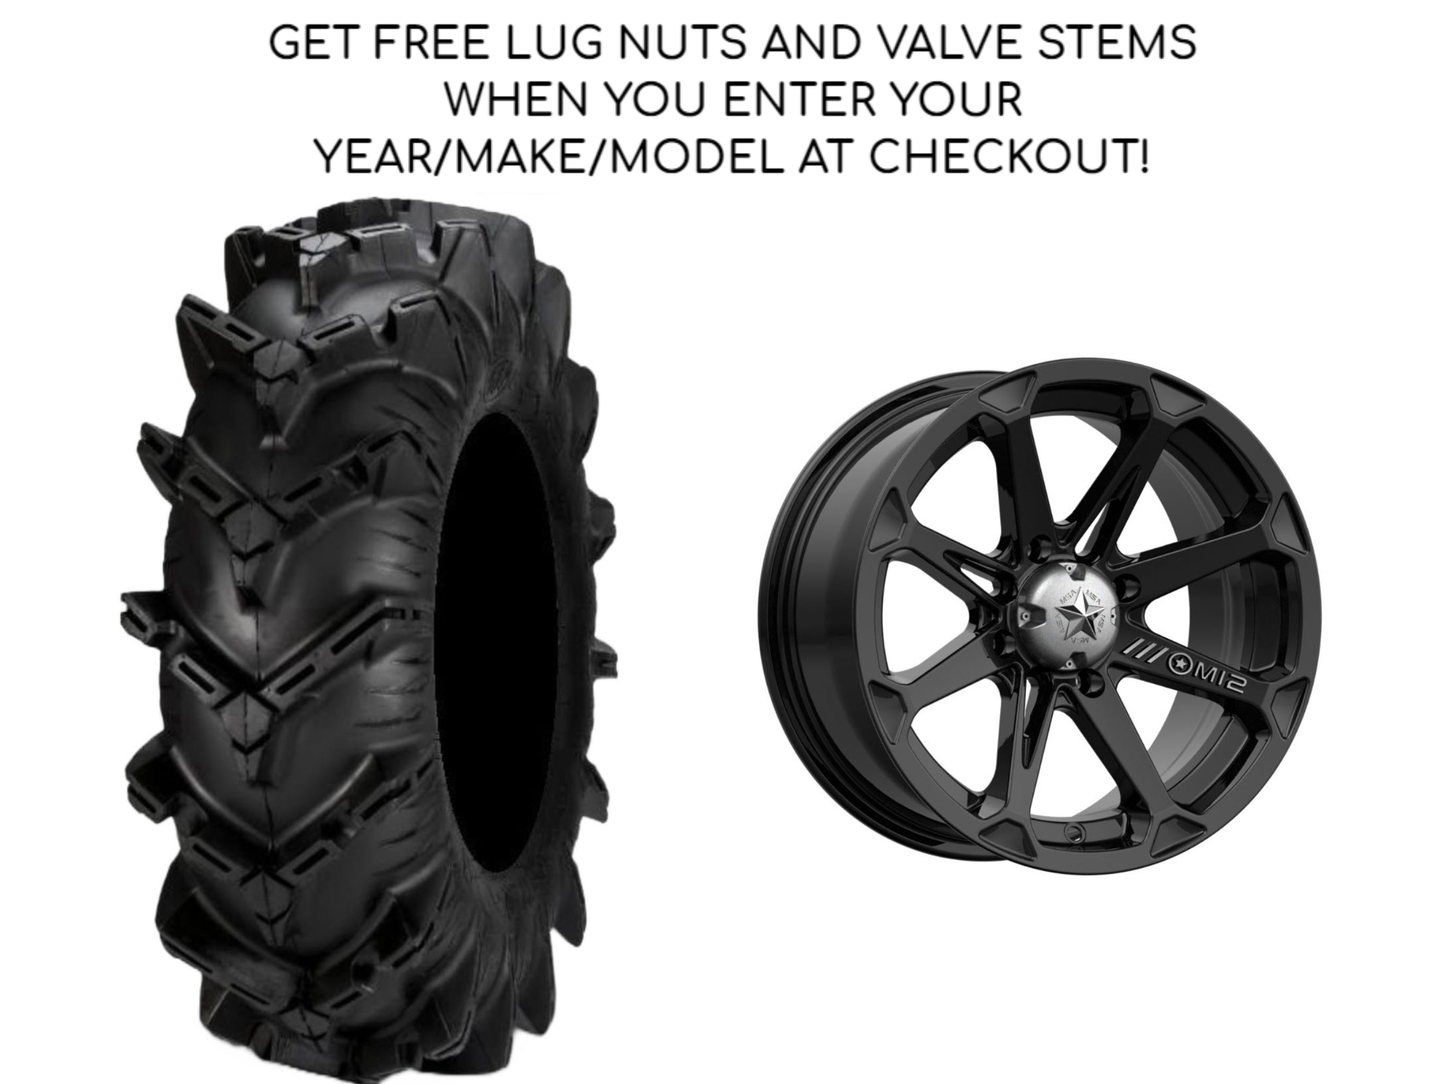 ITP CRYPTID | M12  - WHEEL AND TIRE KITS